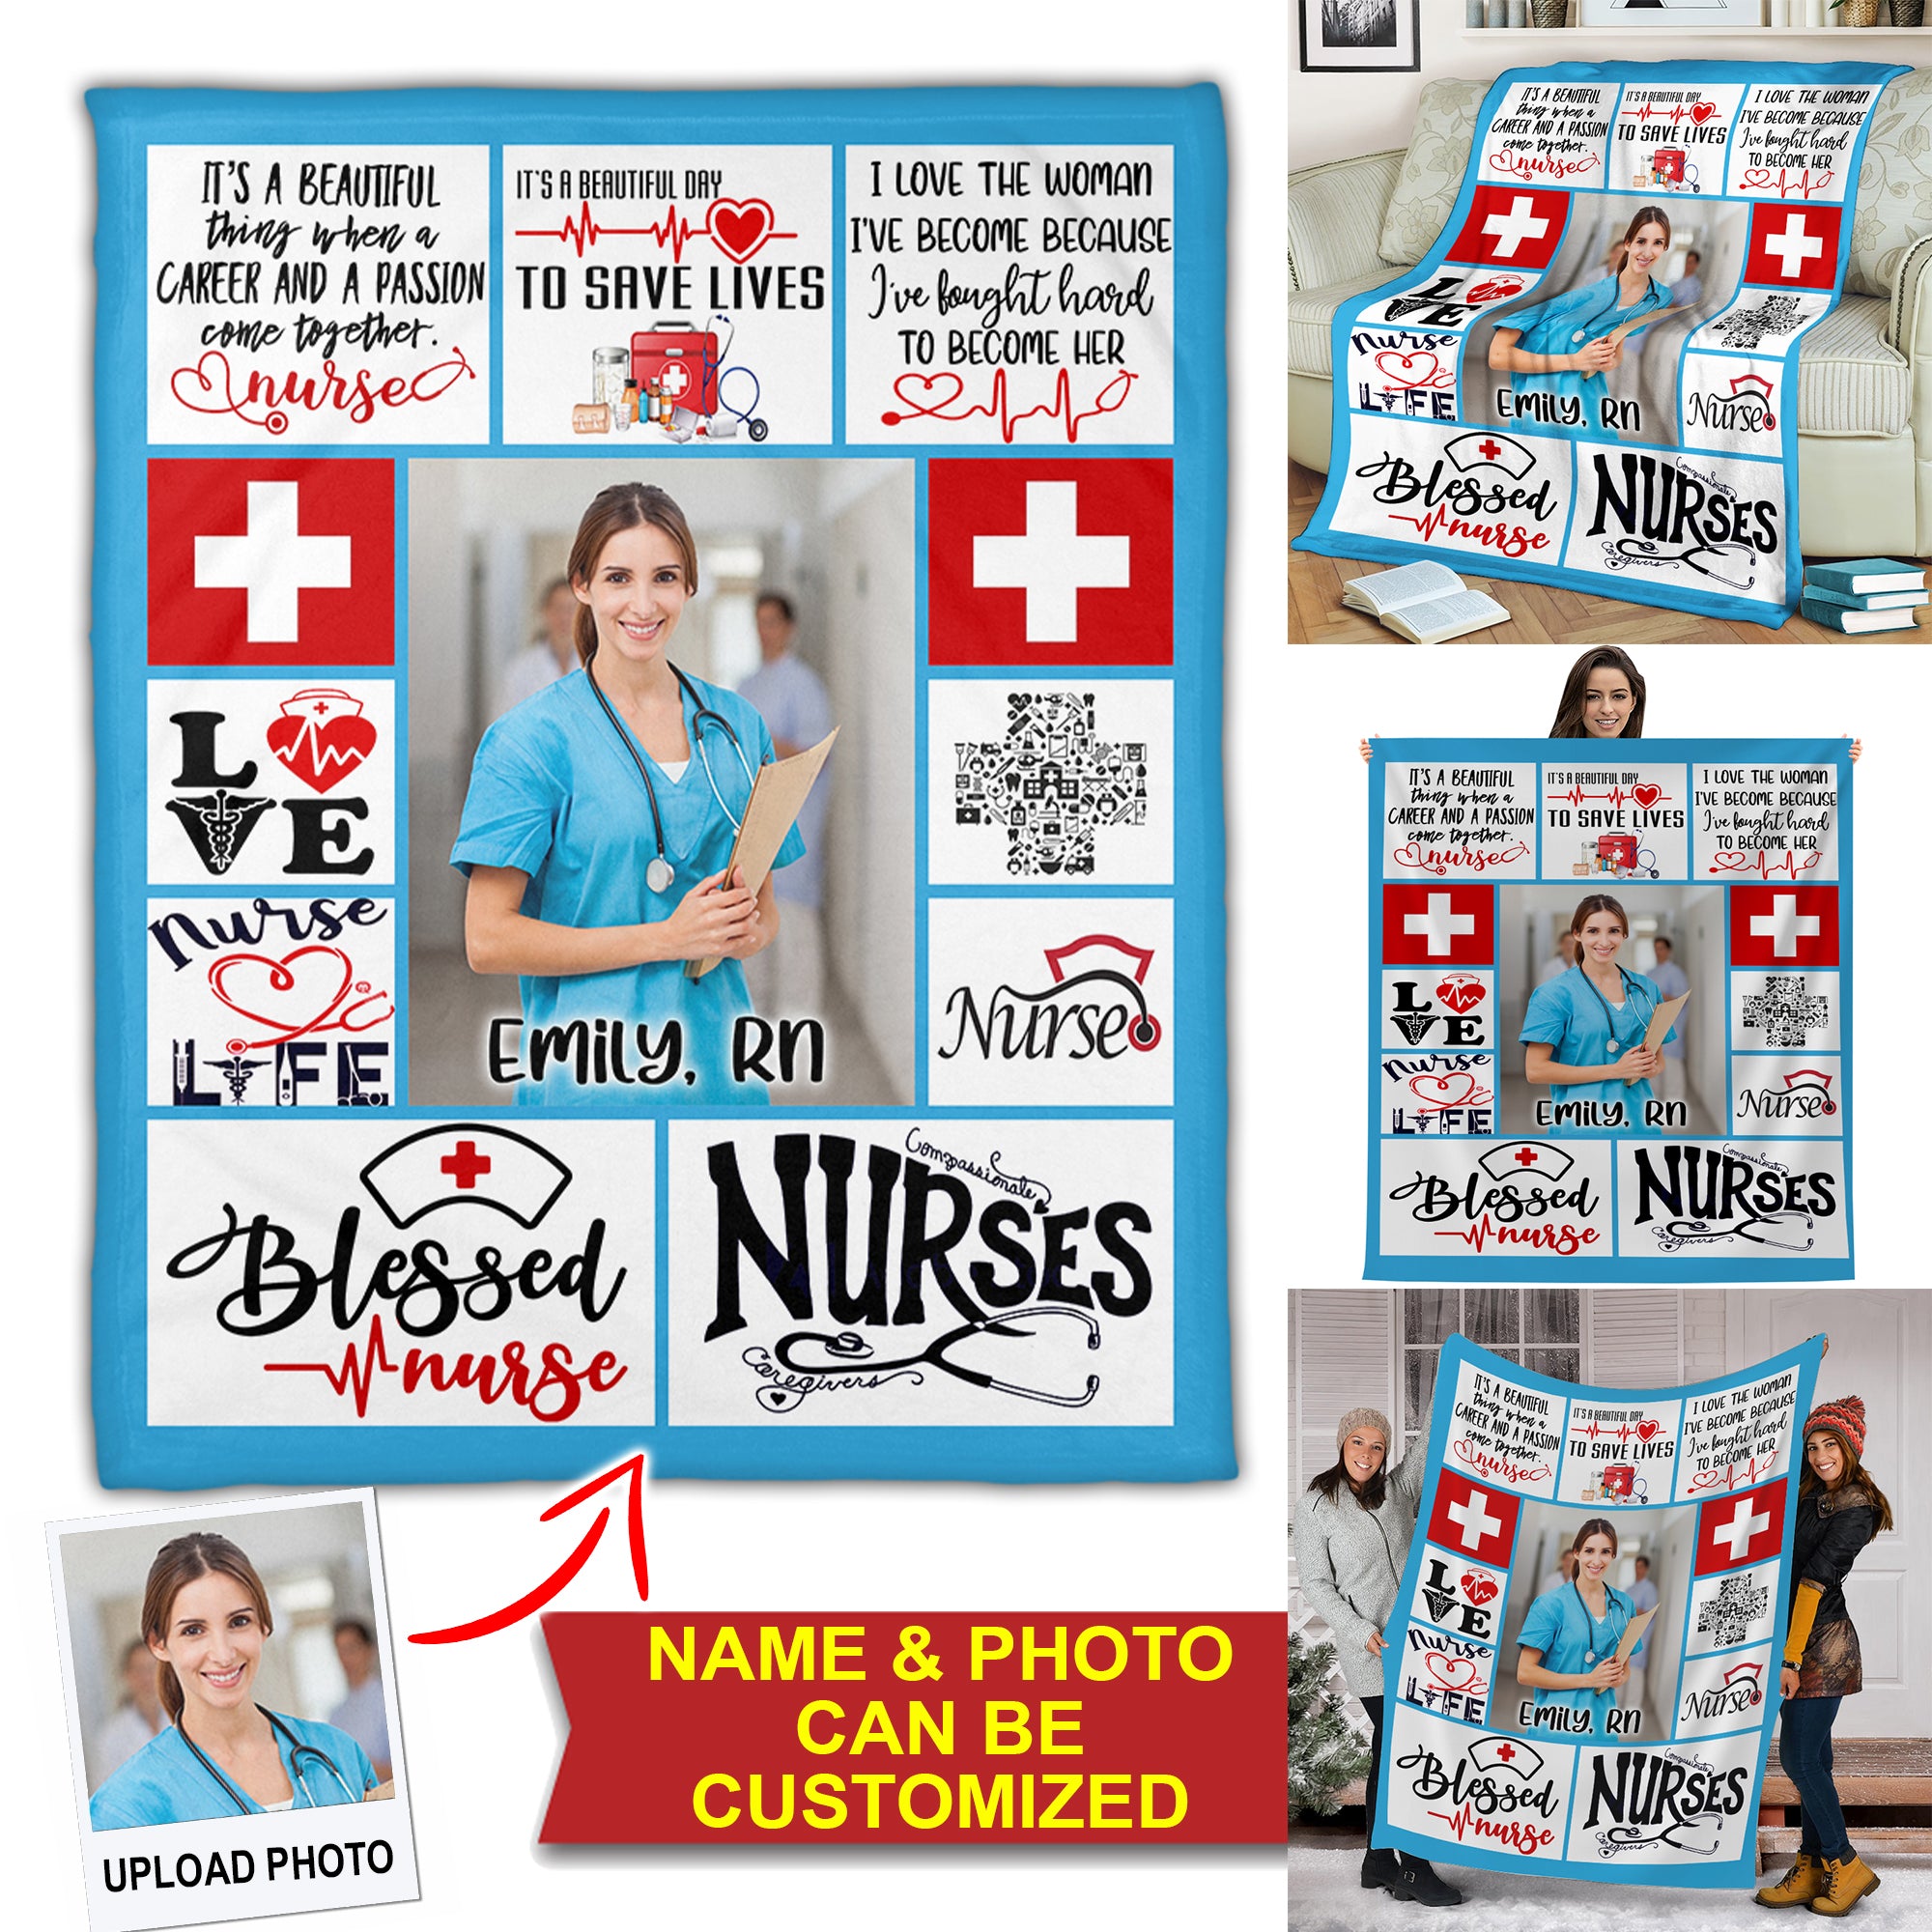 Blessed Nurse, It's A Beautiful Day To Save Lives - Custom Photo And name - Personalized Fleece Blanket